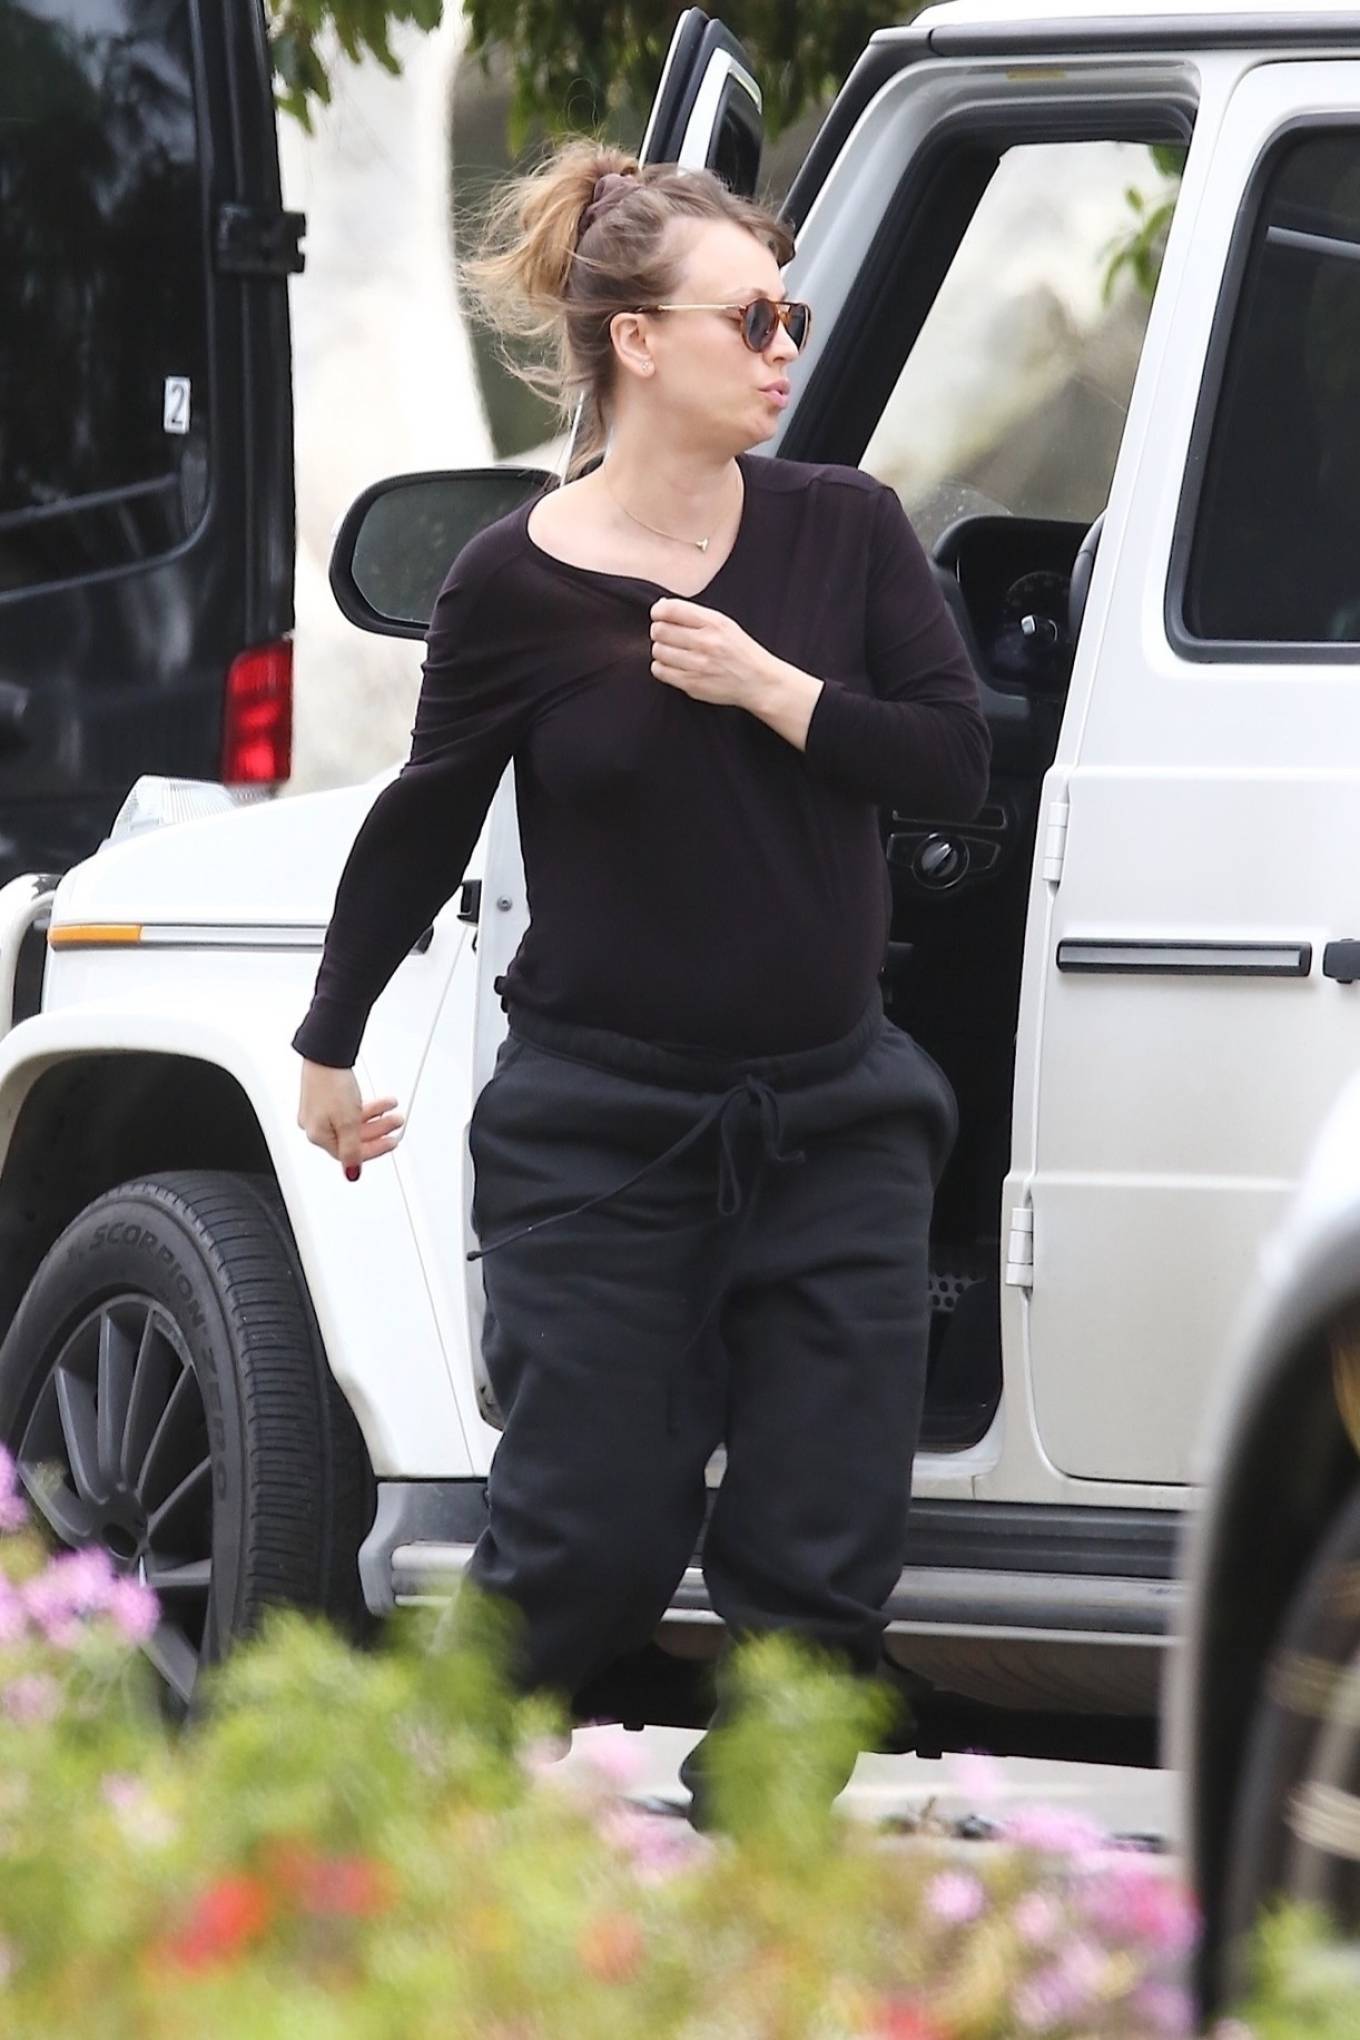 Kaley Cuoco - Films in Los Angeles while pregnant